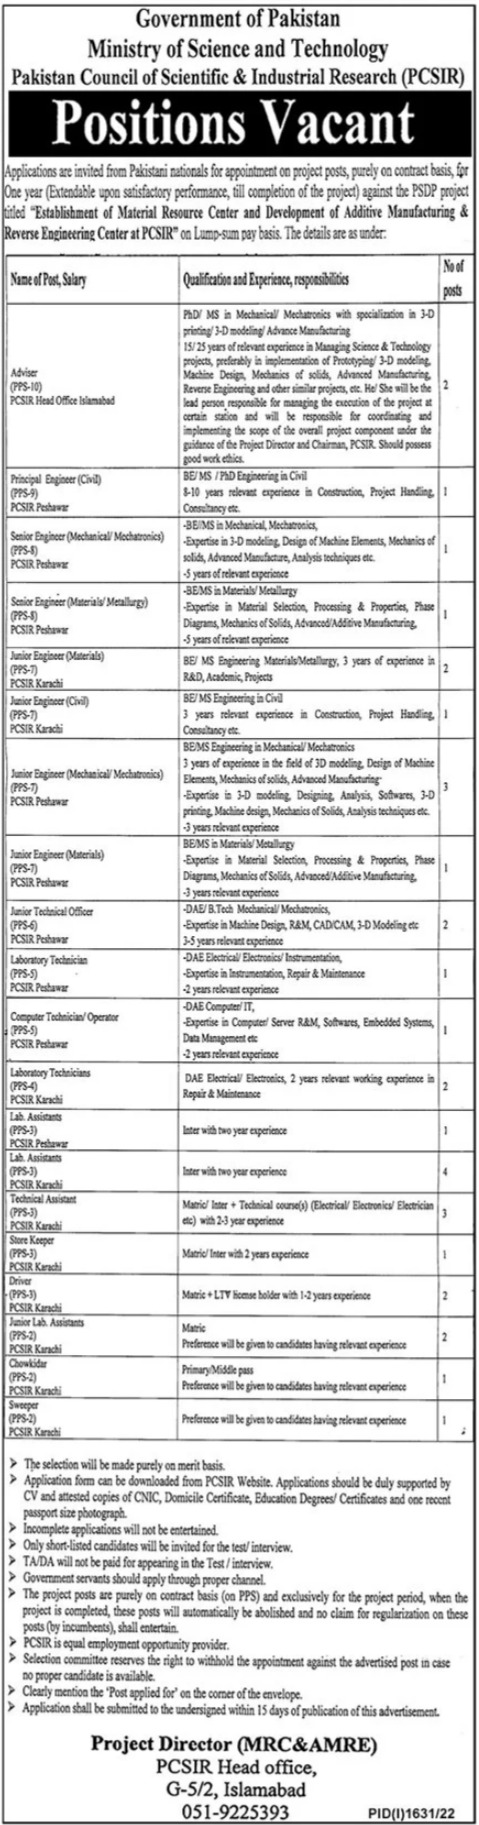 New Govt Jobs Pakistan Today At Ministry of Science Technology